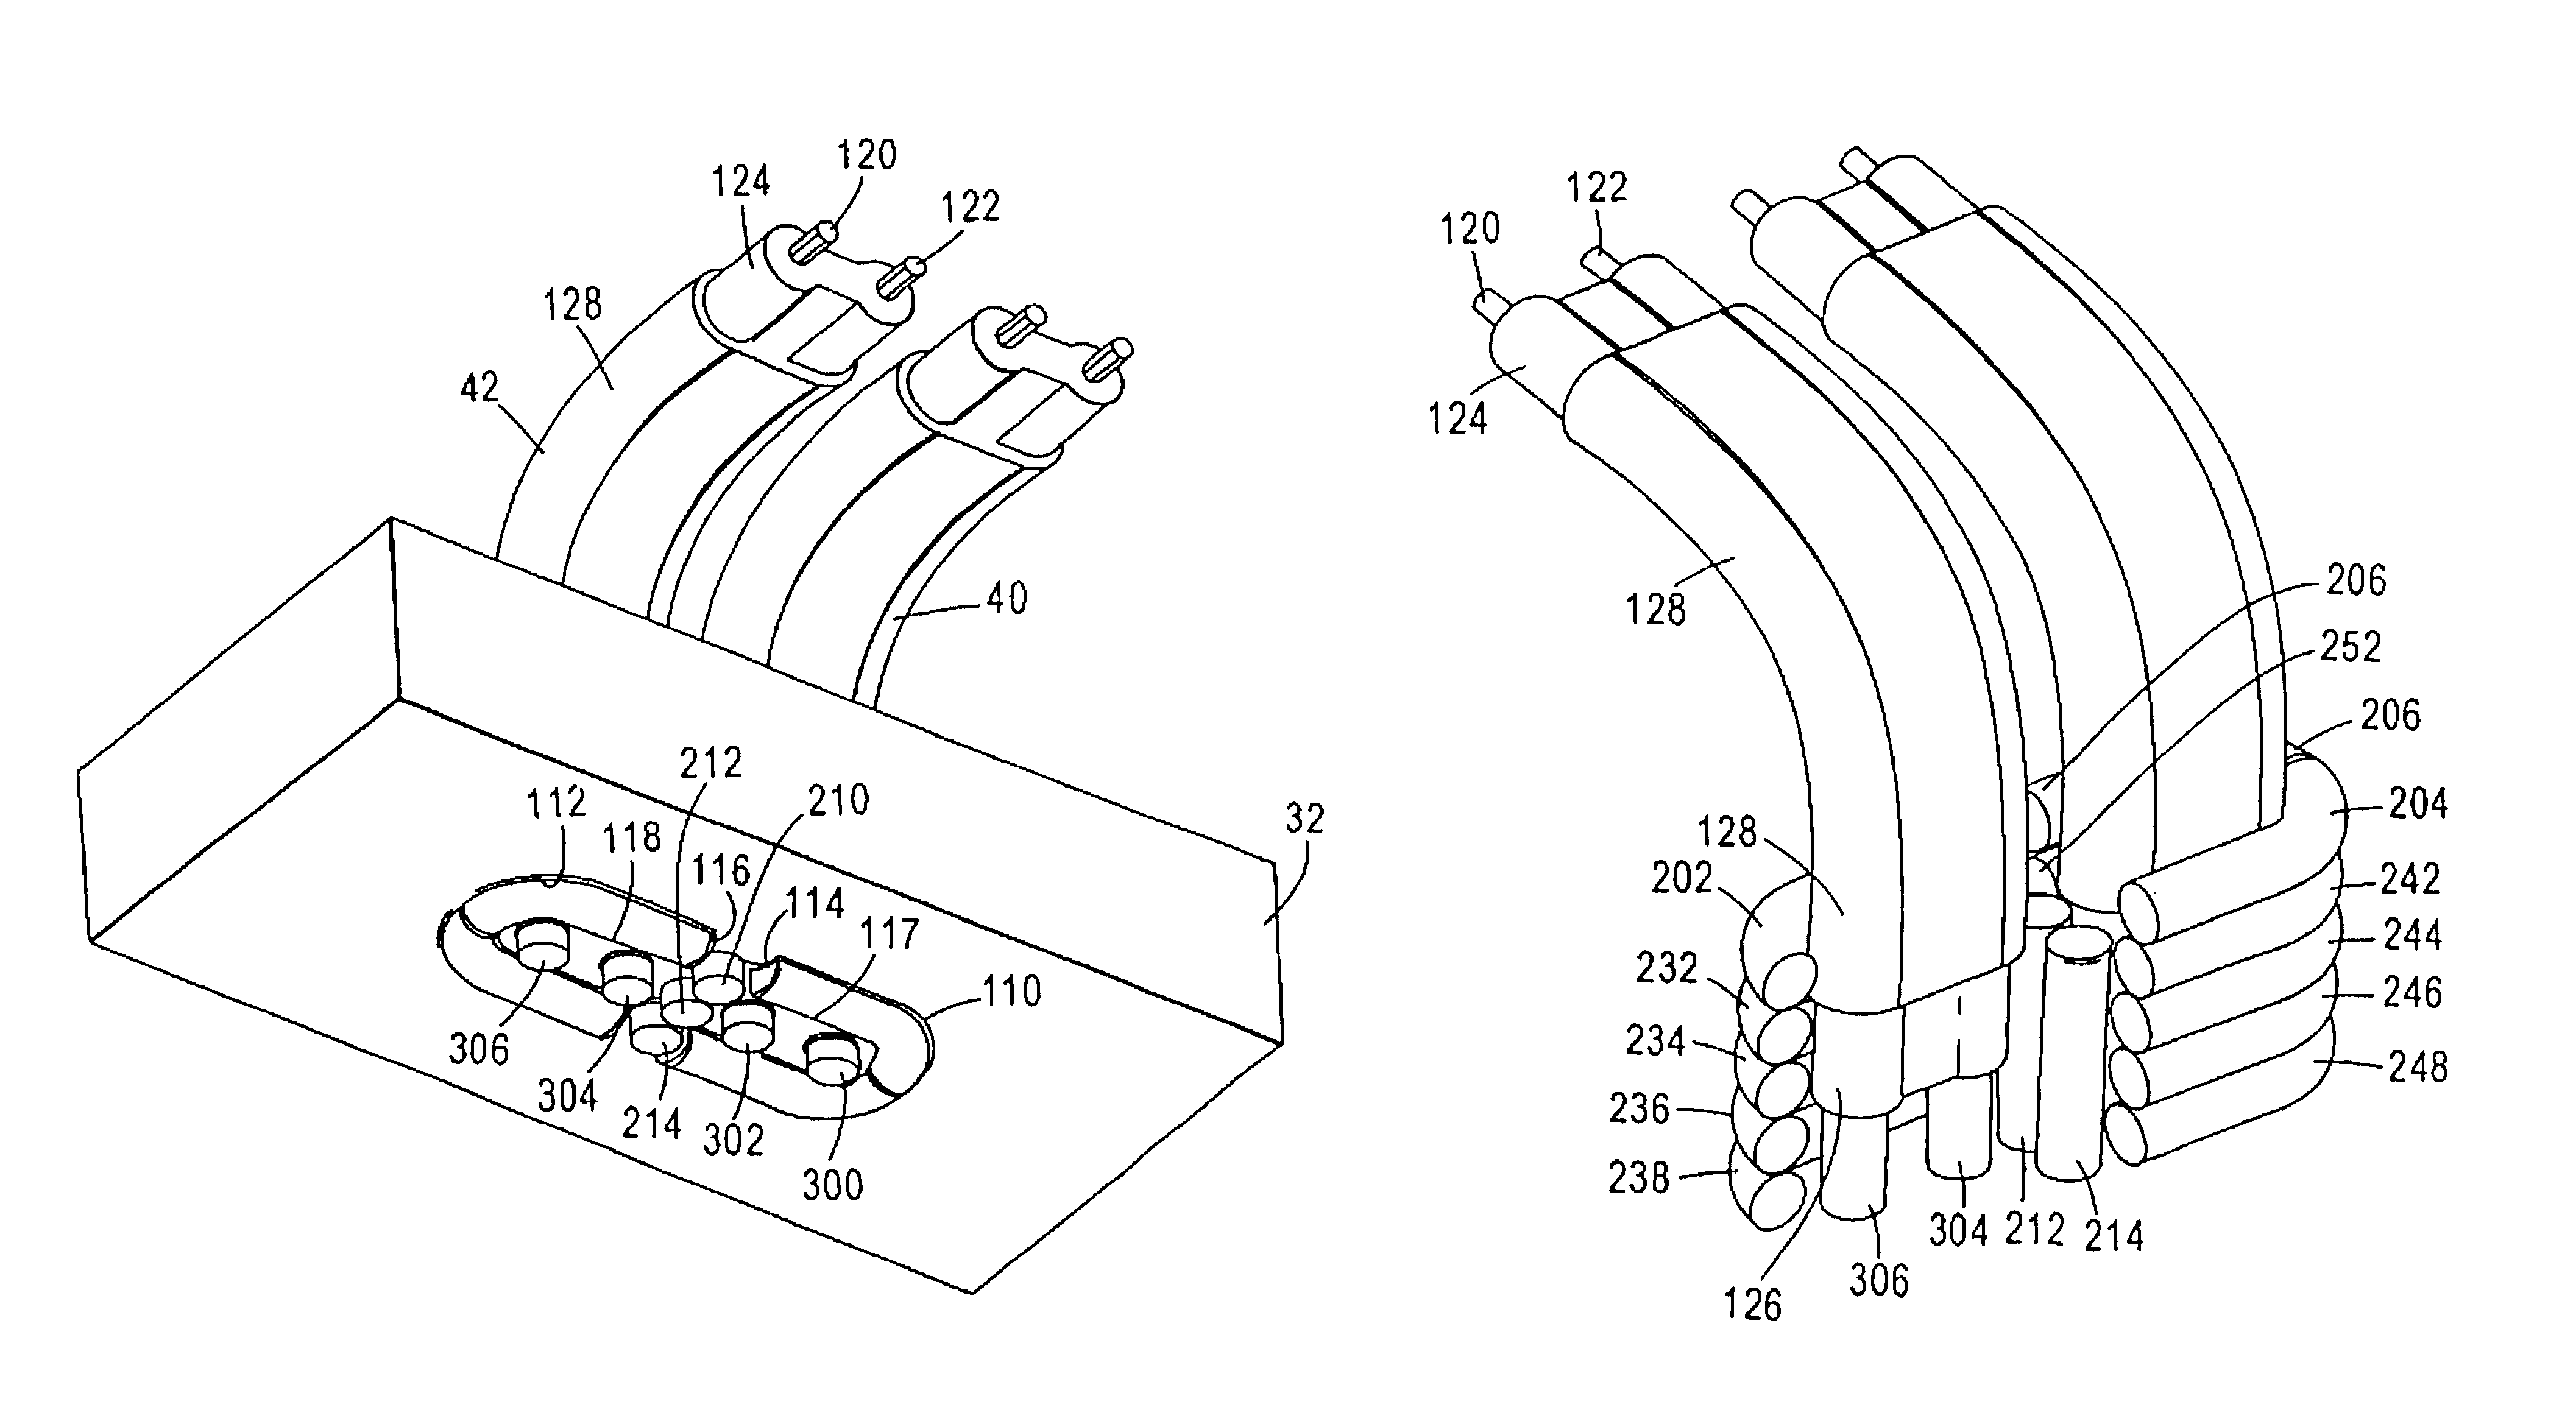 High speed, high density interconnect system for differential and single-ended transmission applications